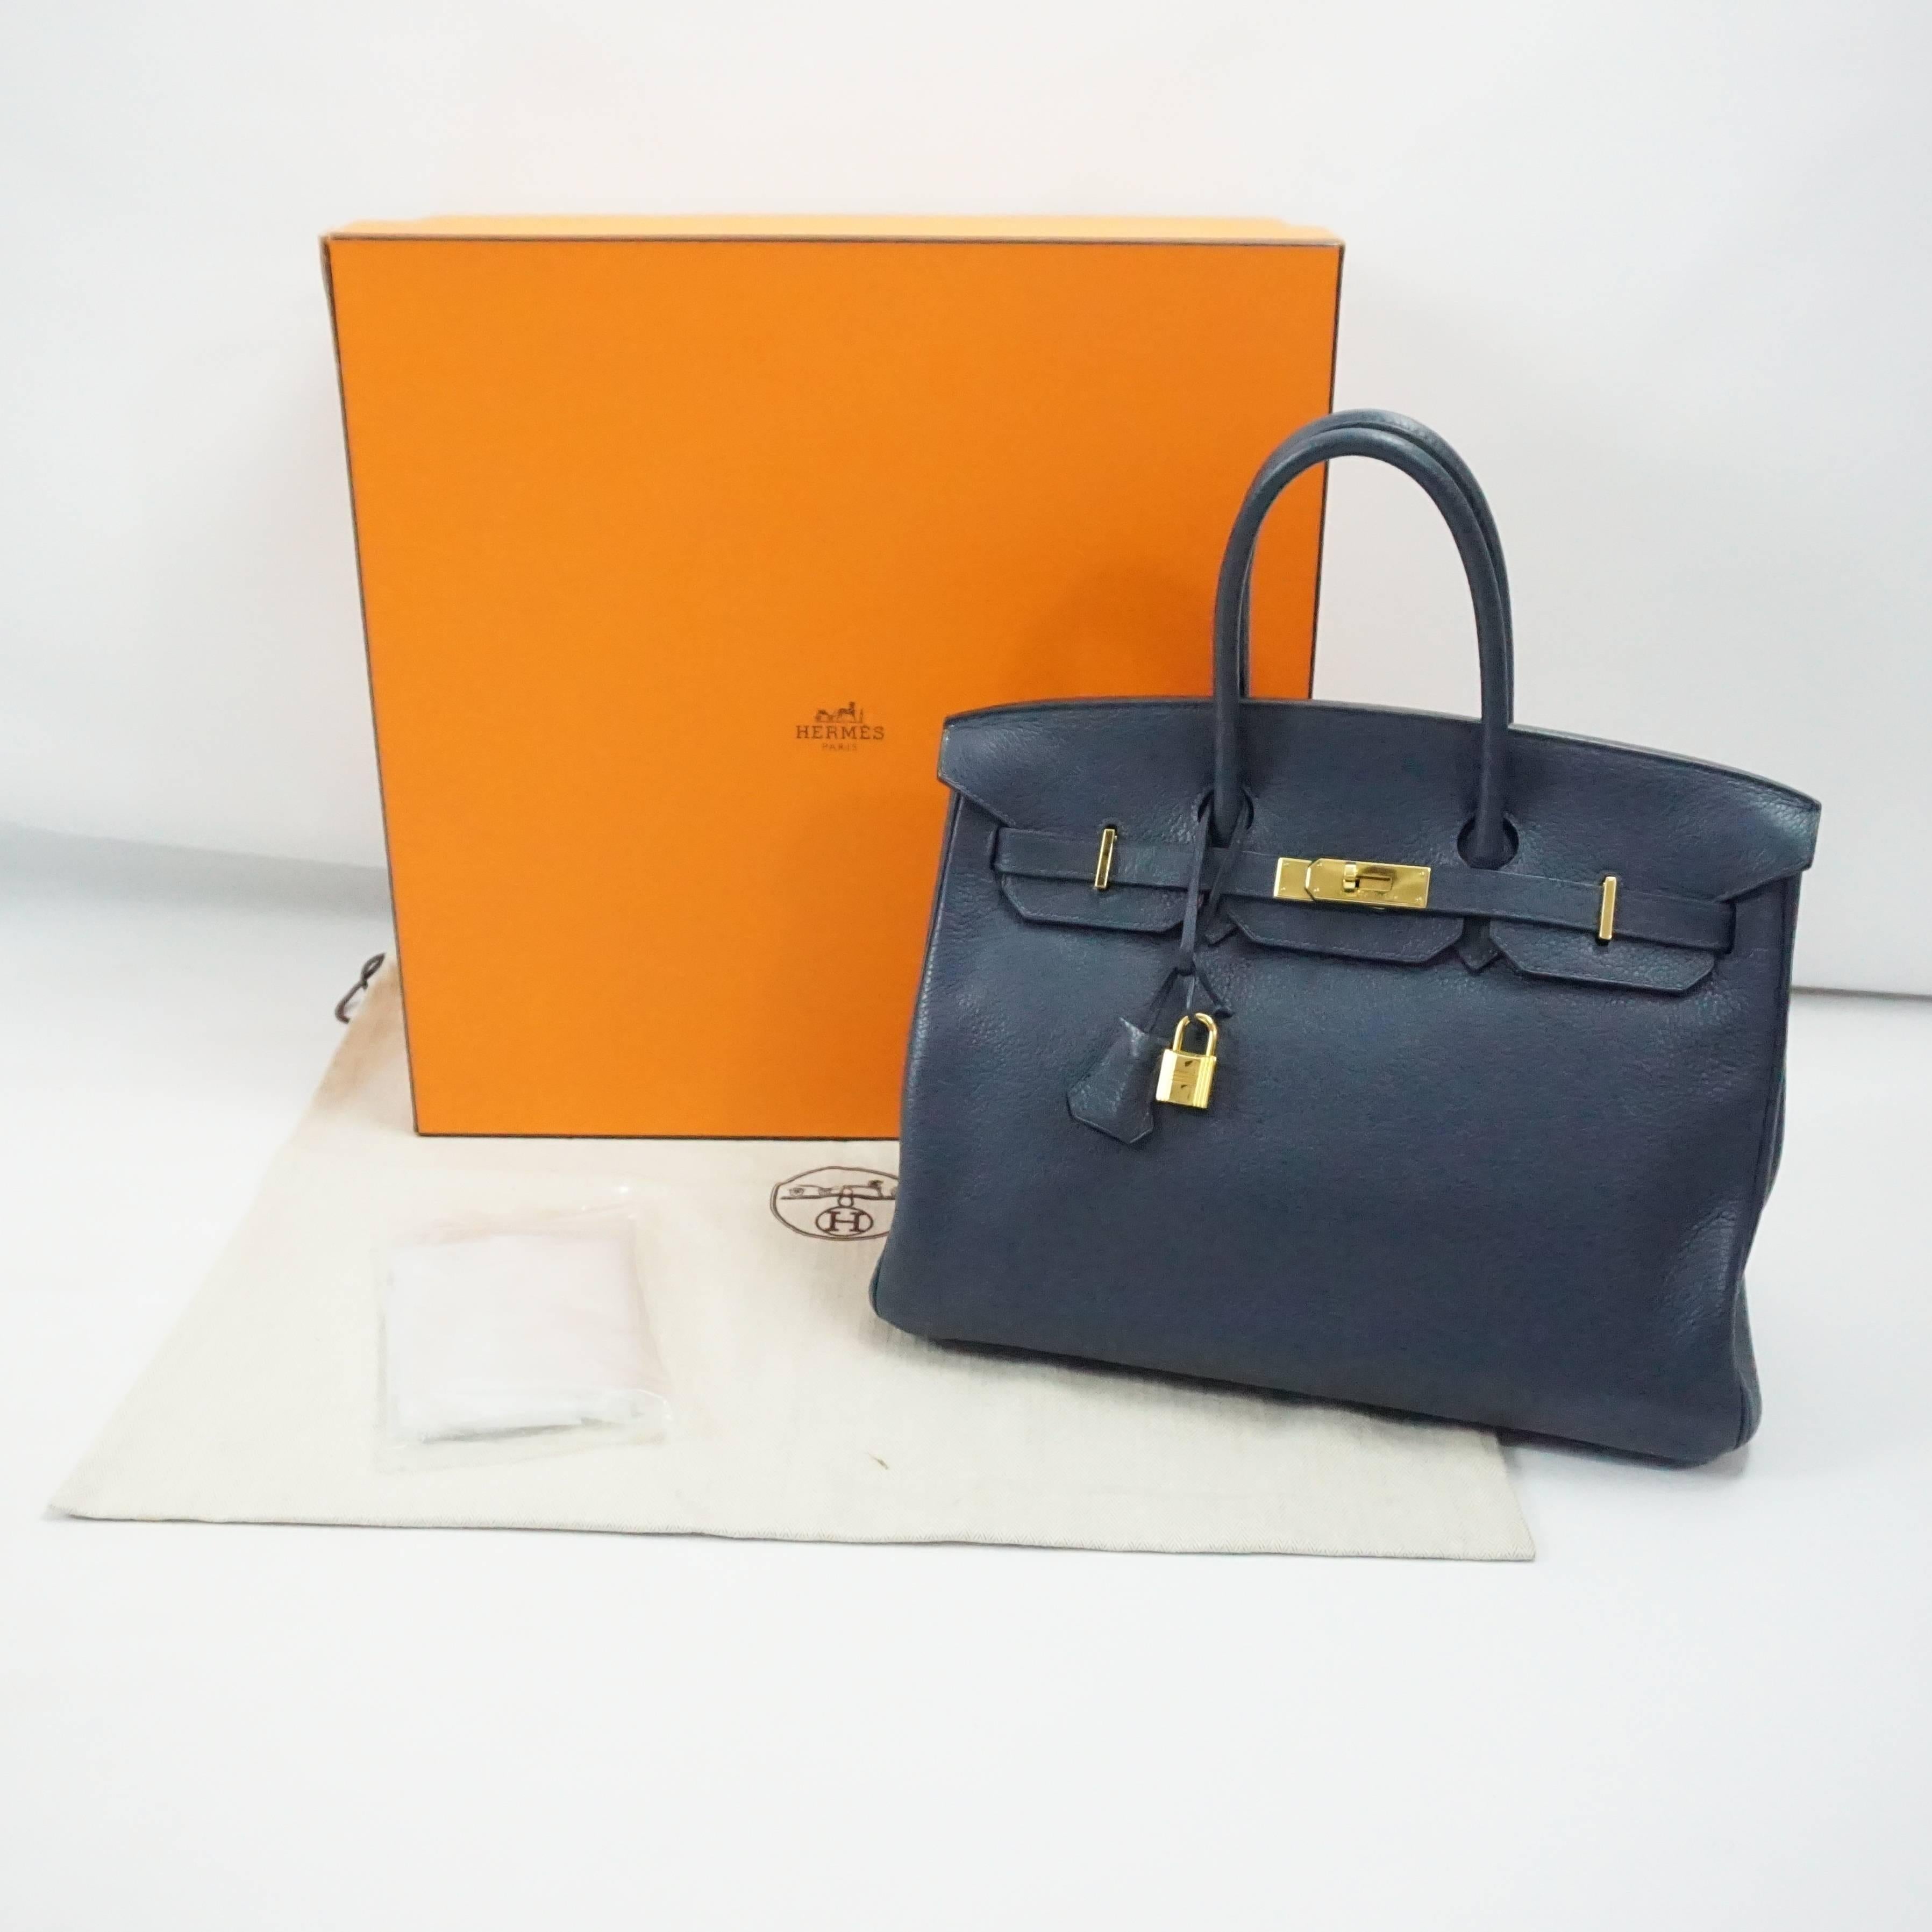 This gorgeous 35cm Hermes Birkin is made of navy clemence leather and has shining gold hardware. It comes with its raincoat, duster, and box. This bag is in excellent condition.

Measurements
Height: 9.8"
Length: about 13.75"
Depth: 7"